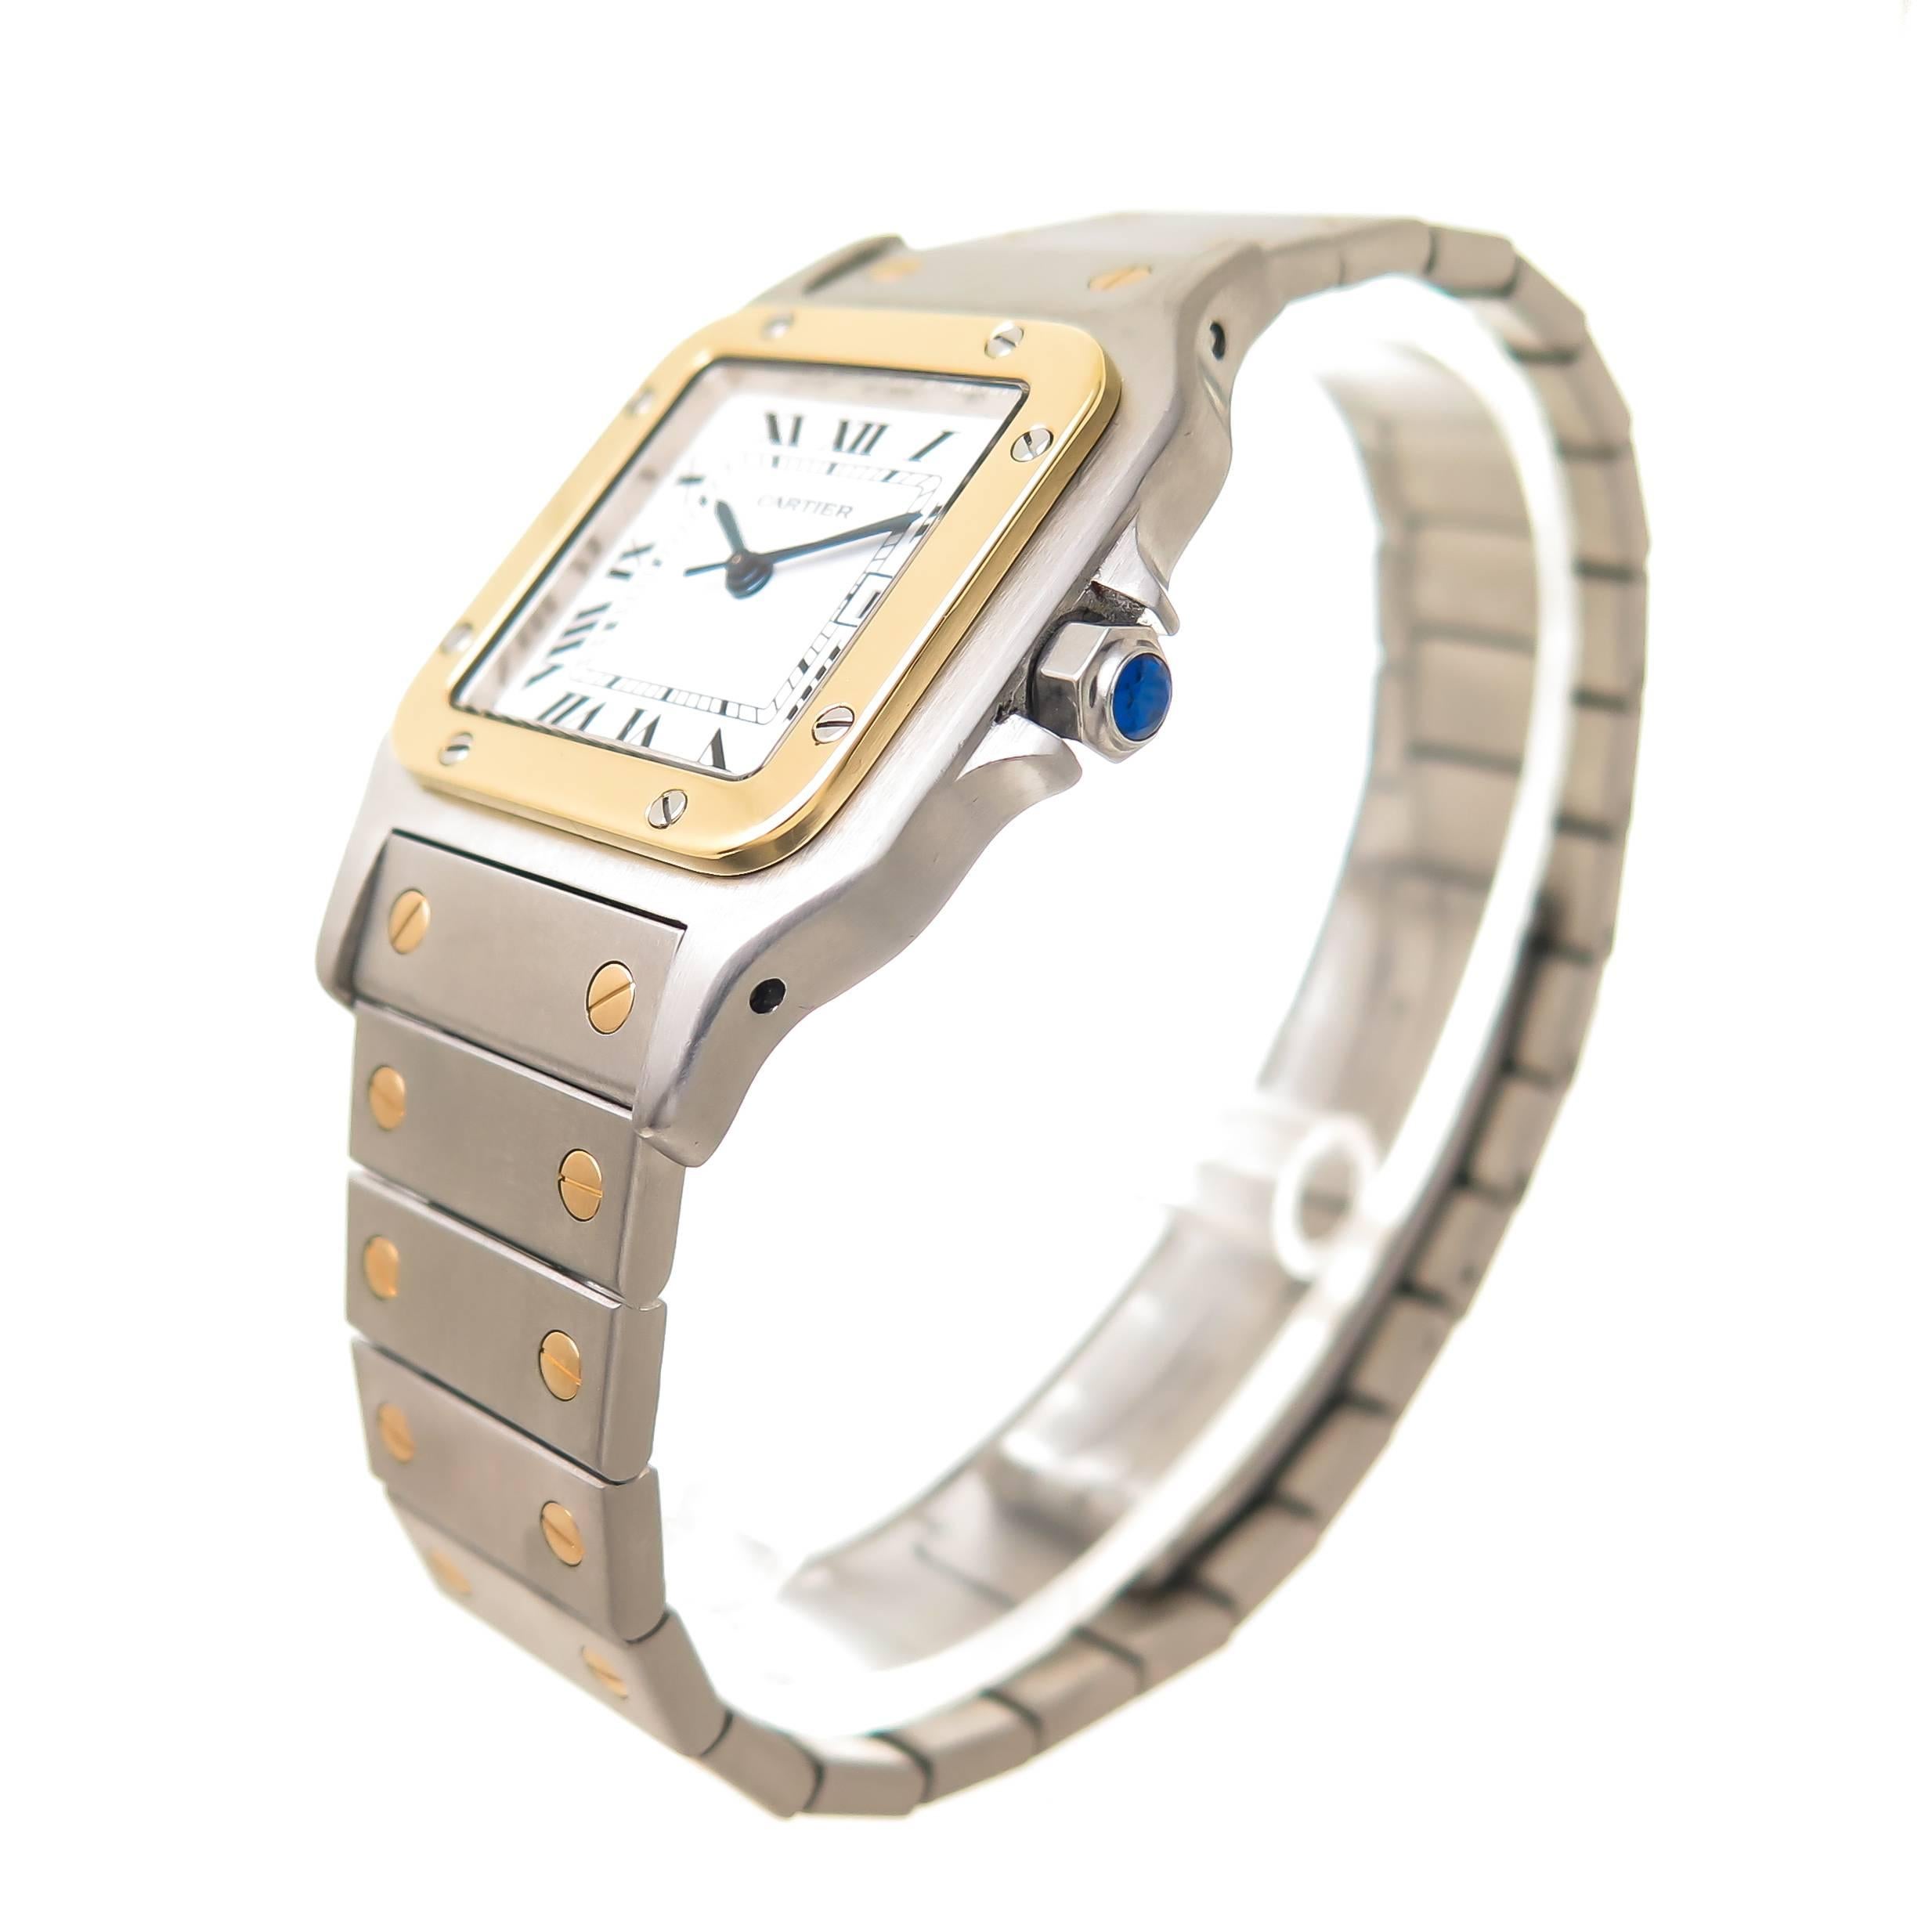 Circa 2000 Cartier Santos Wrist watch, 41 X 30 MM Water resistant Stainless Steel case with 18k Yellow Gold Bezel, Automatic, self winding movement, White Dial with Black roman Numerals, sweep seconds hand, calendar window at the 3 position and a